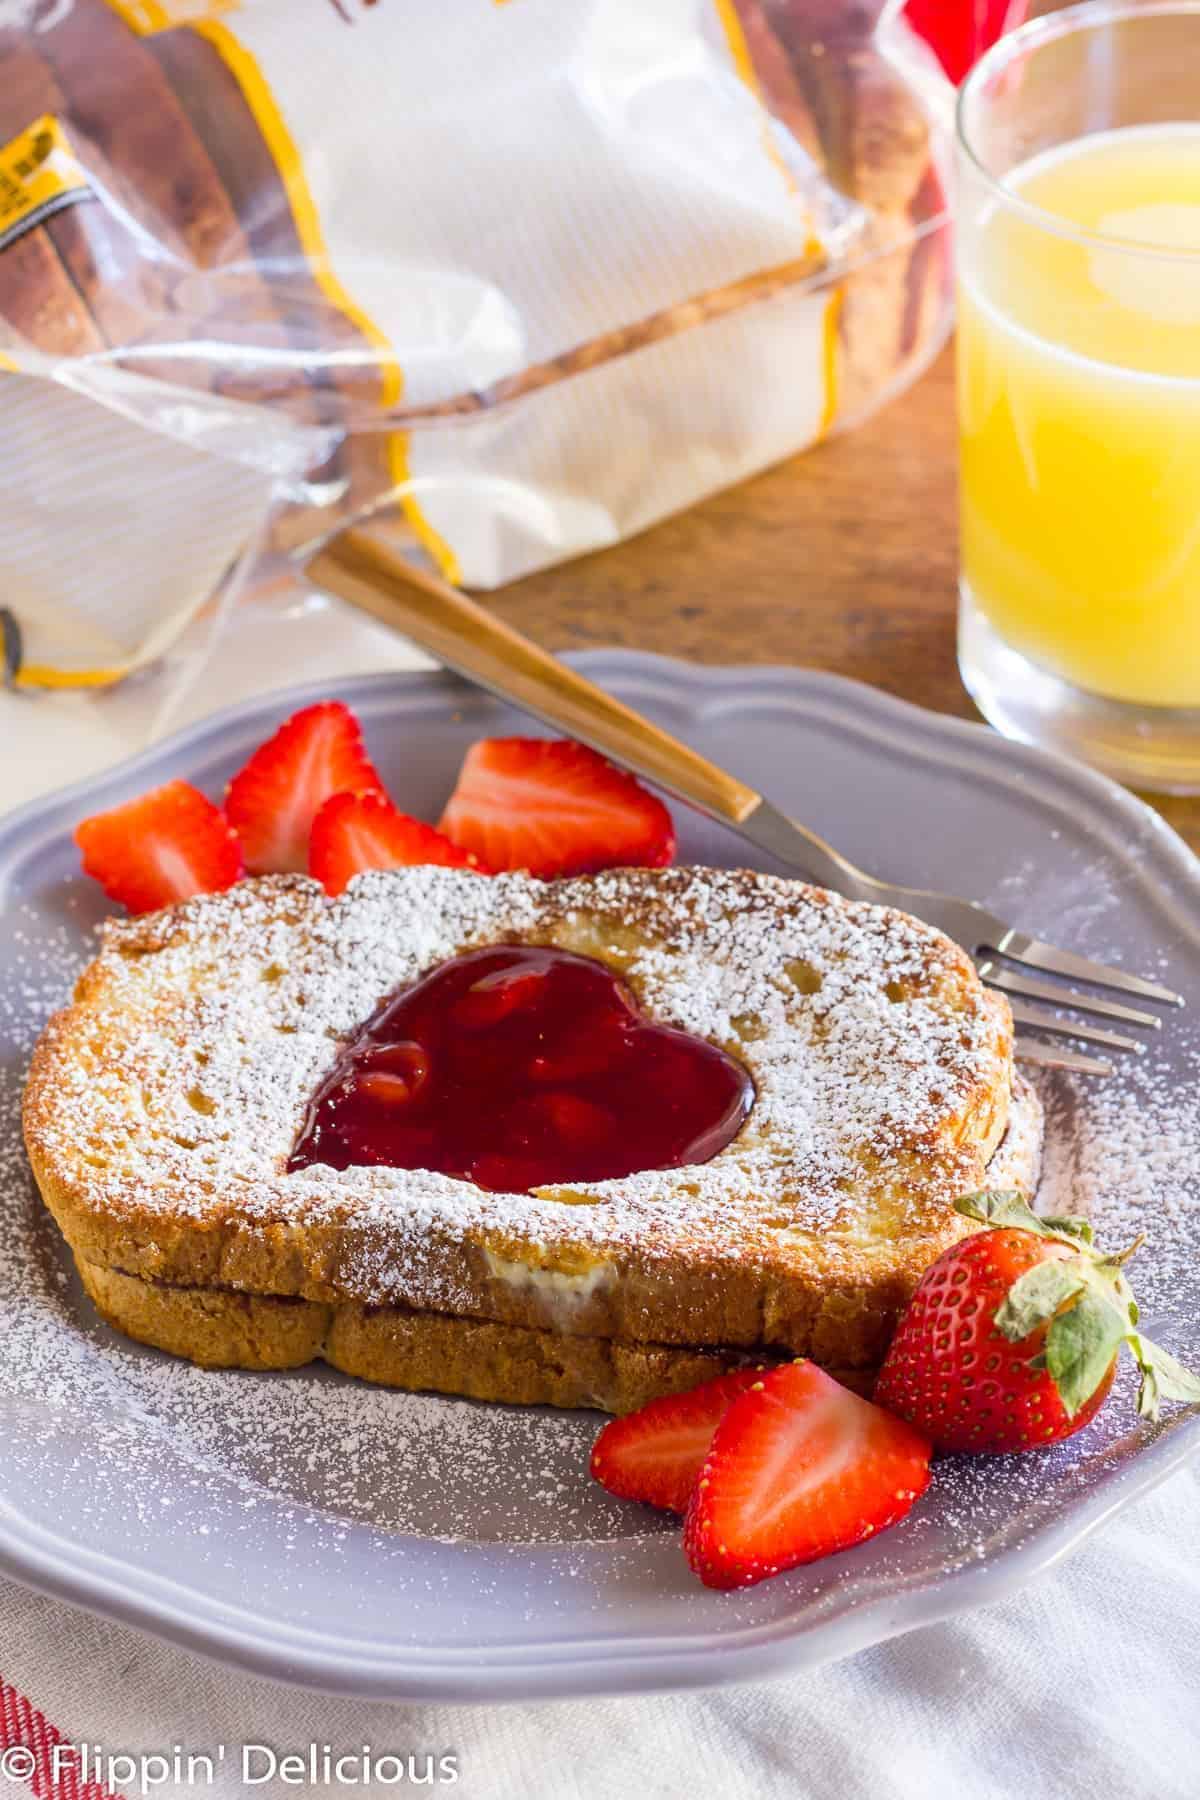 Flavorful Gluten-Free Nutella Stuffed French Toast on a gray plate with a fork and sliced strawberries.